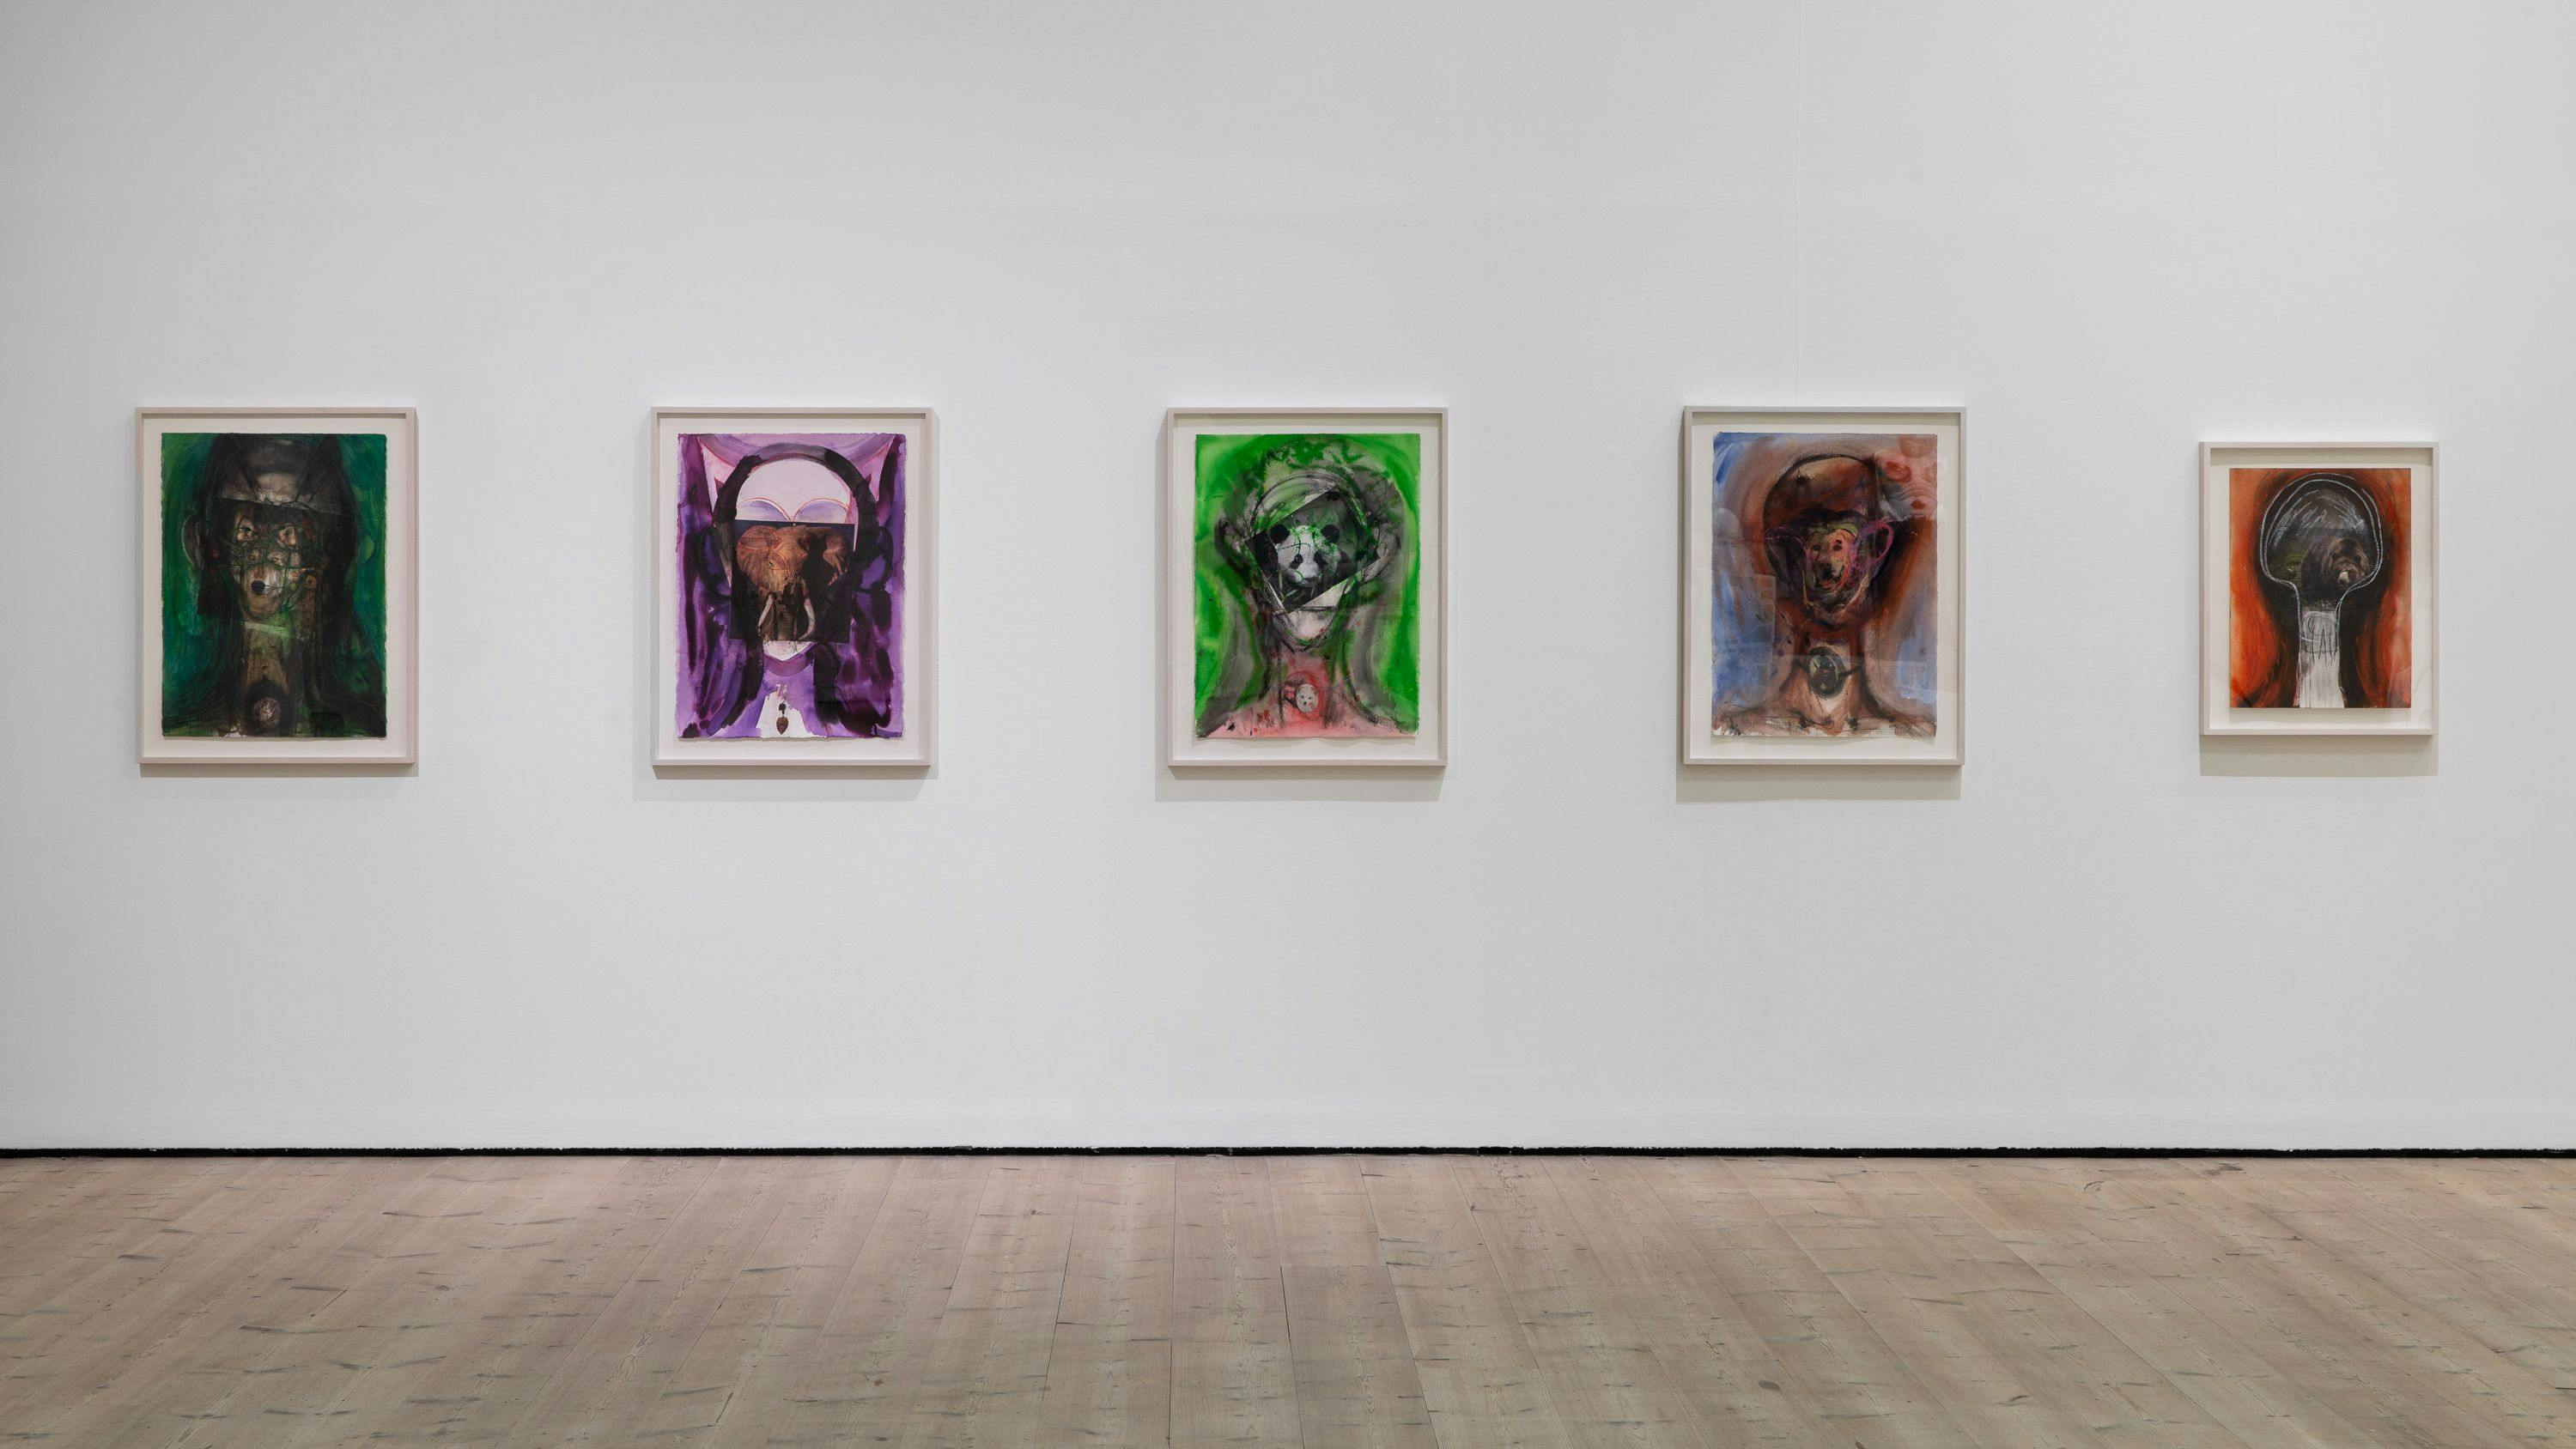 Installation view of the exhibition, Huma Bhabha, Against Time, at the Baltic Centre for Contemporary Art in Gateshead, dated 2020.